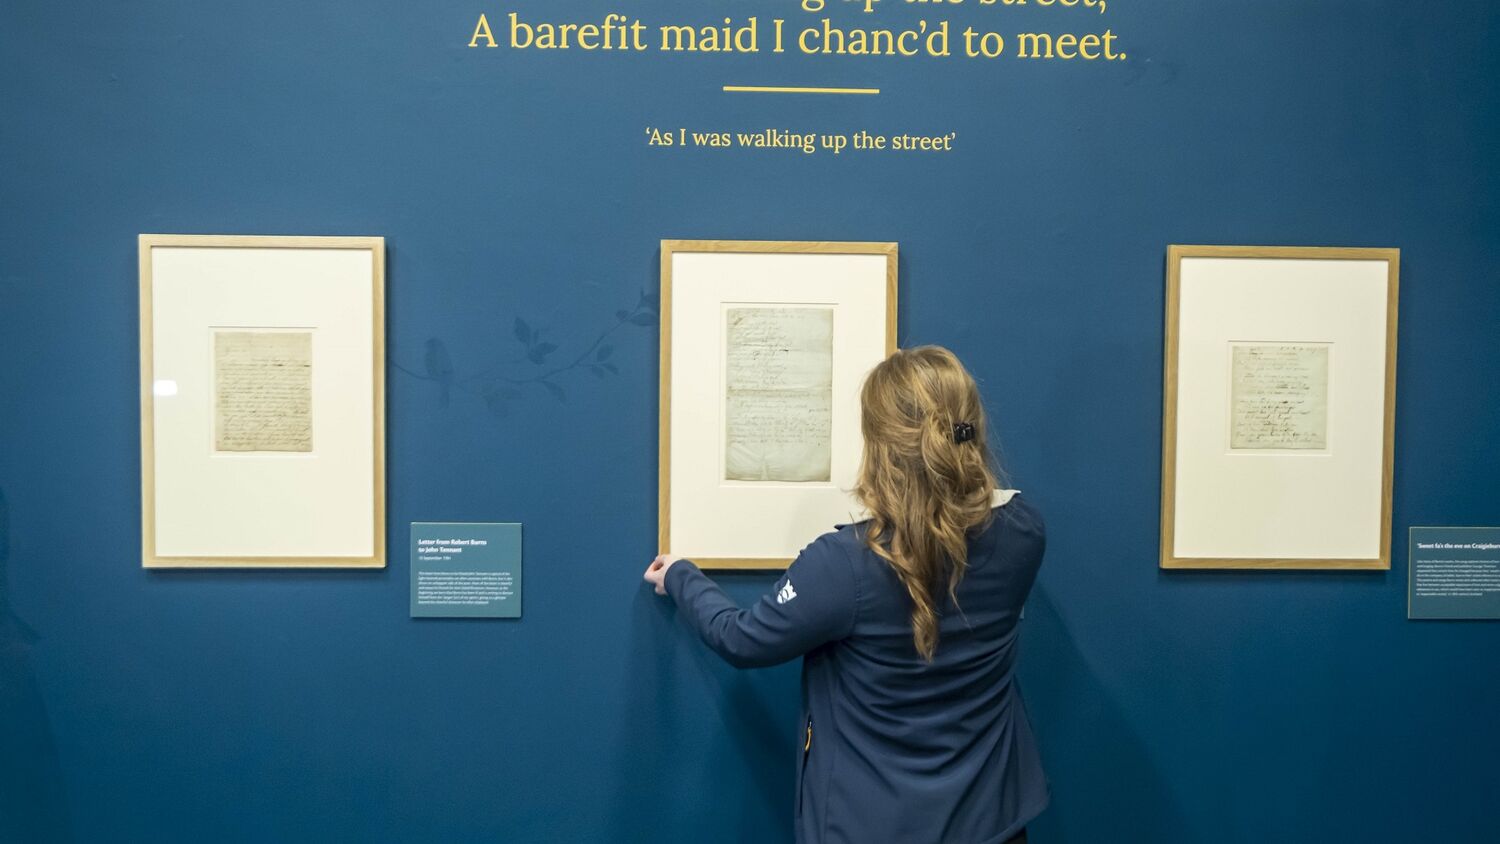 A lady stands with her back to the camera, adjusting a framed manuscript hanging on a blue wall. Other framed manuscripts hang beside it as well as interpretation panels. A Burns quote is written on the wall above the manuscripts.